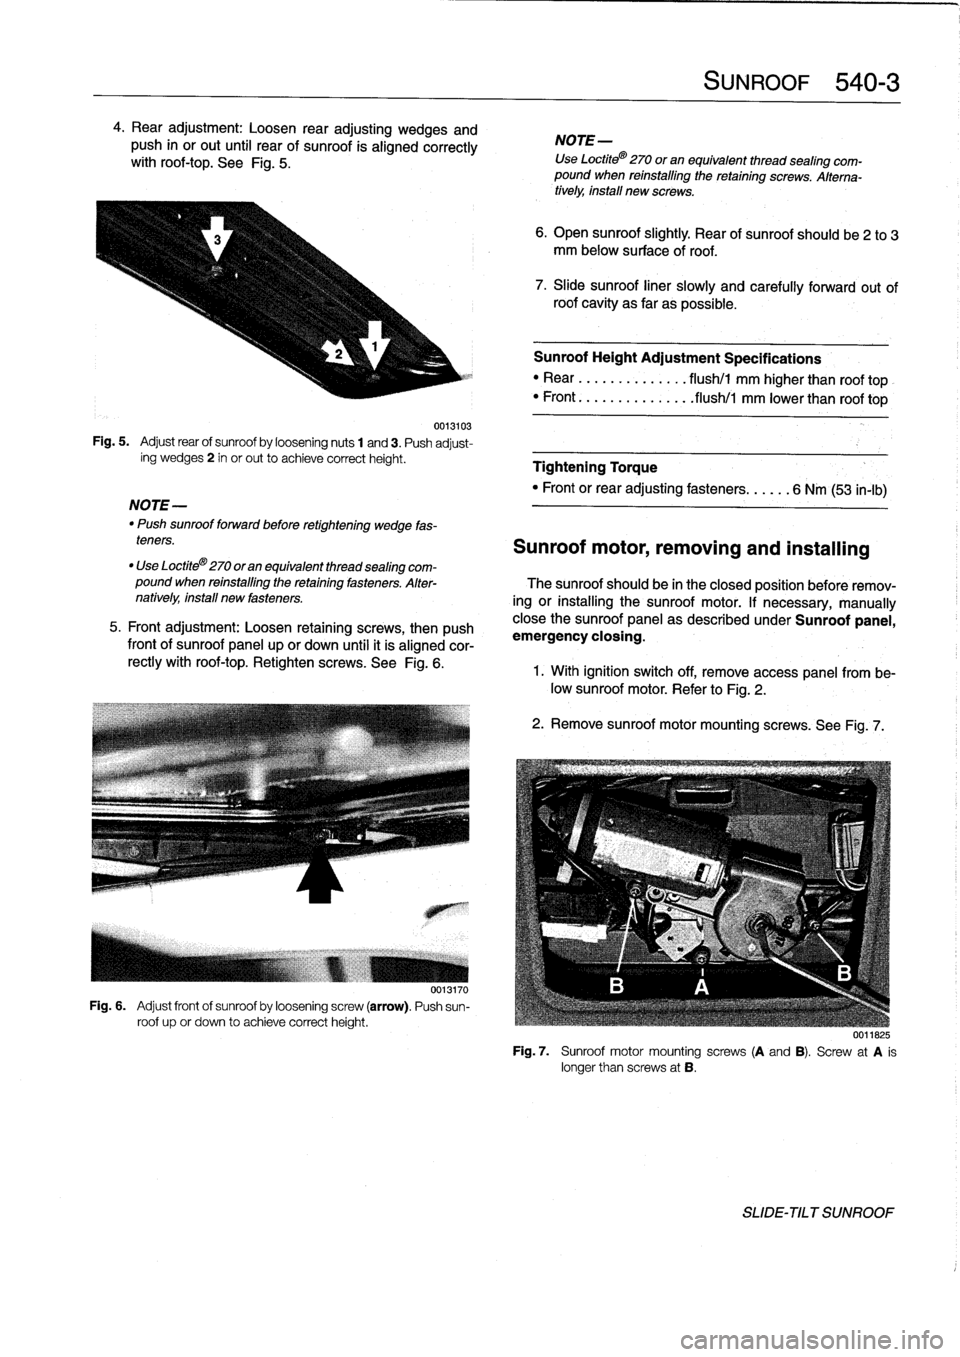 BMW 318i 1994 E36 Workshop Manual 4
.
Rear
adjustment
:
Loosen
rear
adjusting
wedges
and
push
in
or
out
until
rear
of
sunroof
is
aligned
correctly
withroof-top
.
See
Fig
.
5
.

0013103
Fig
.
5
.

	

Adjust
rear
of
sunroof
by
loosening